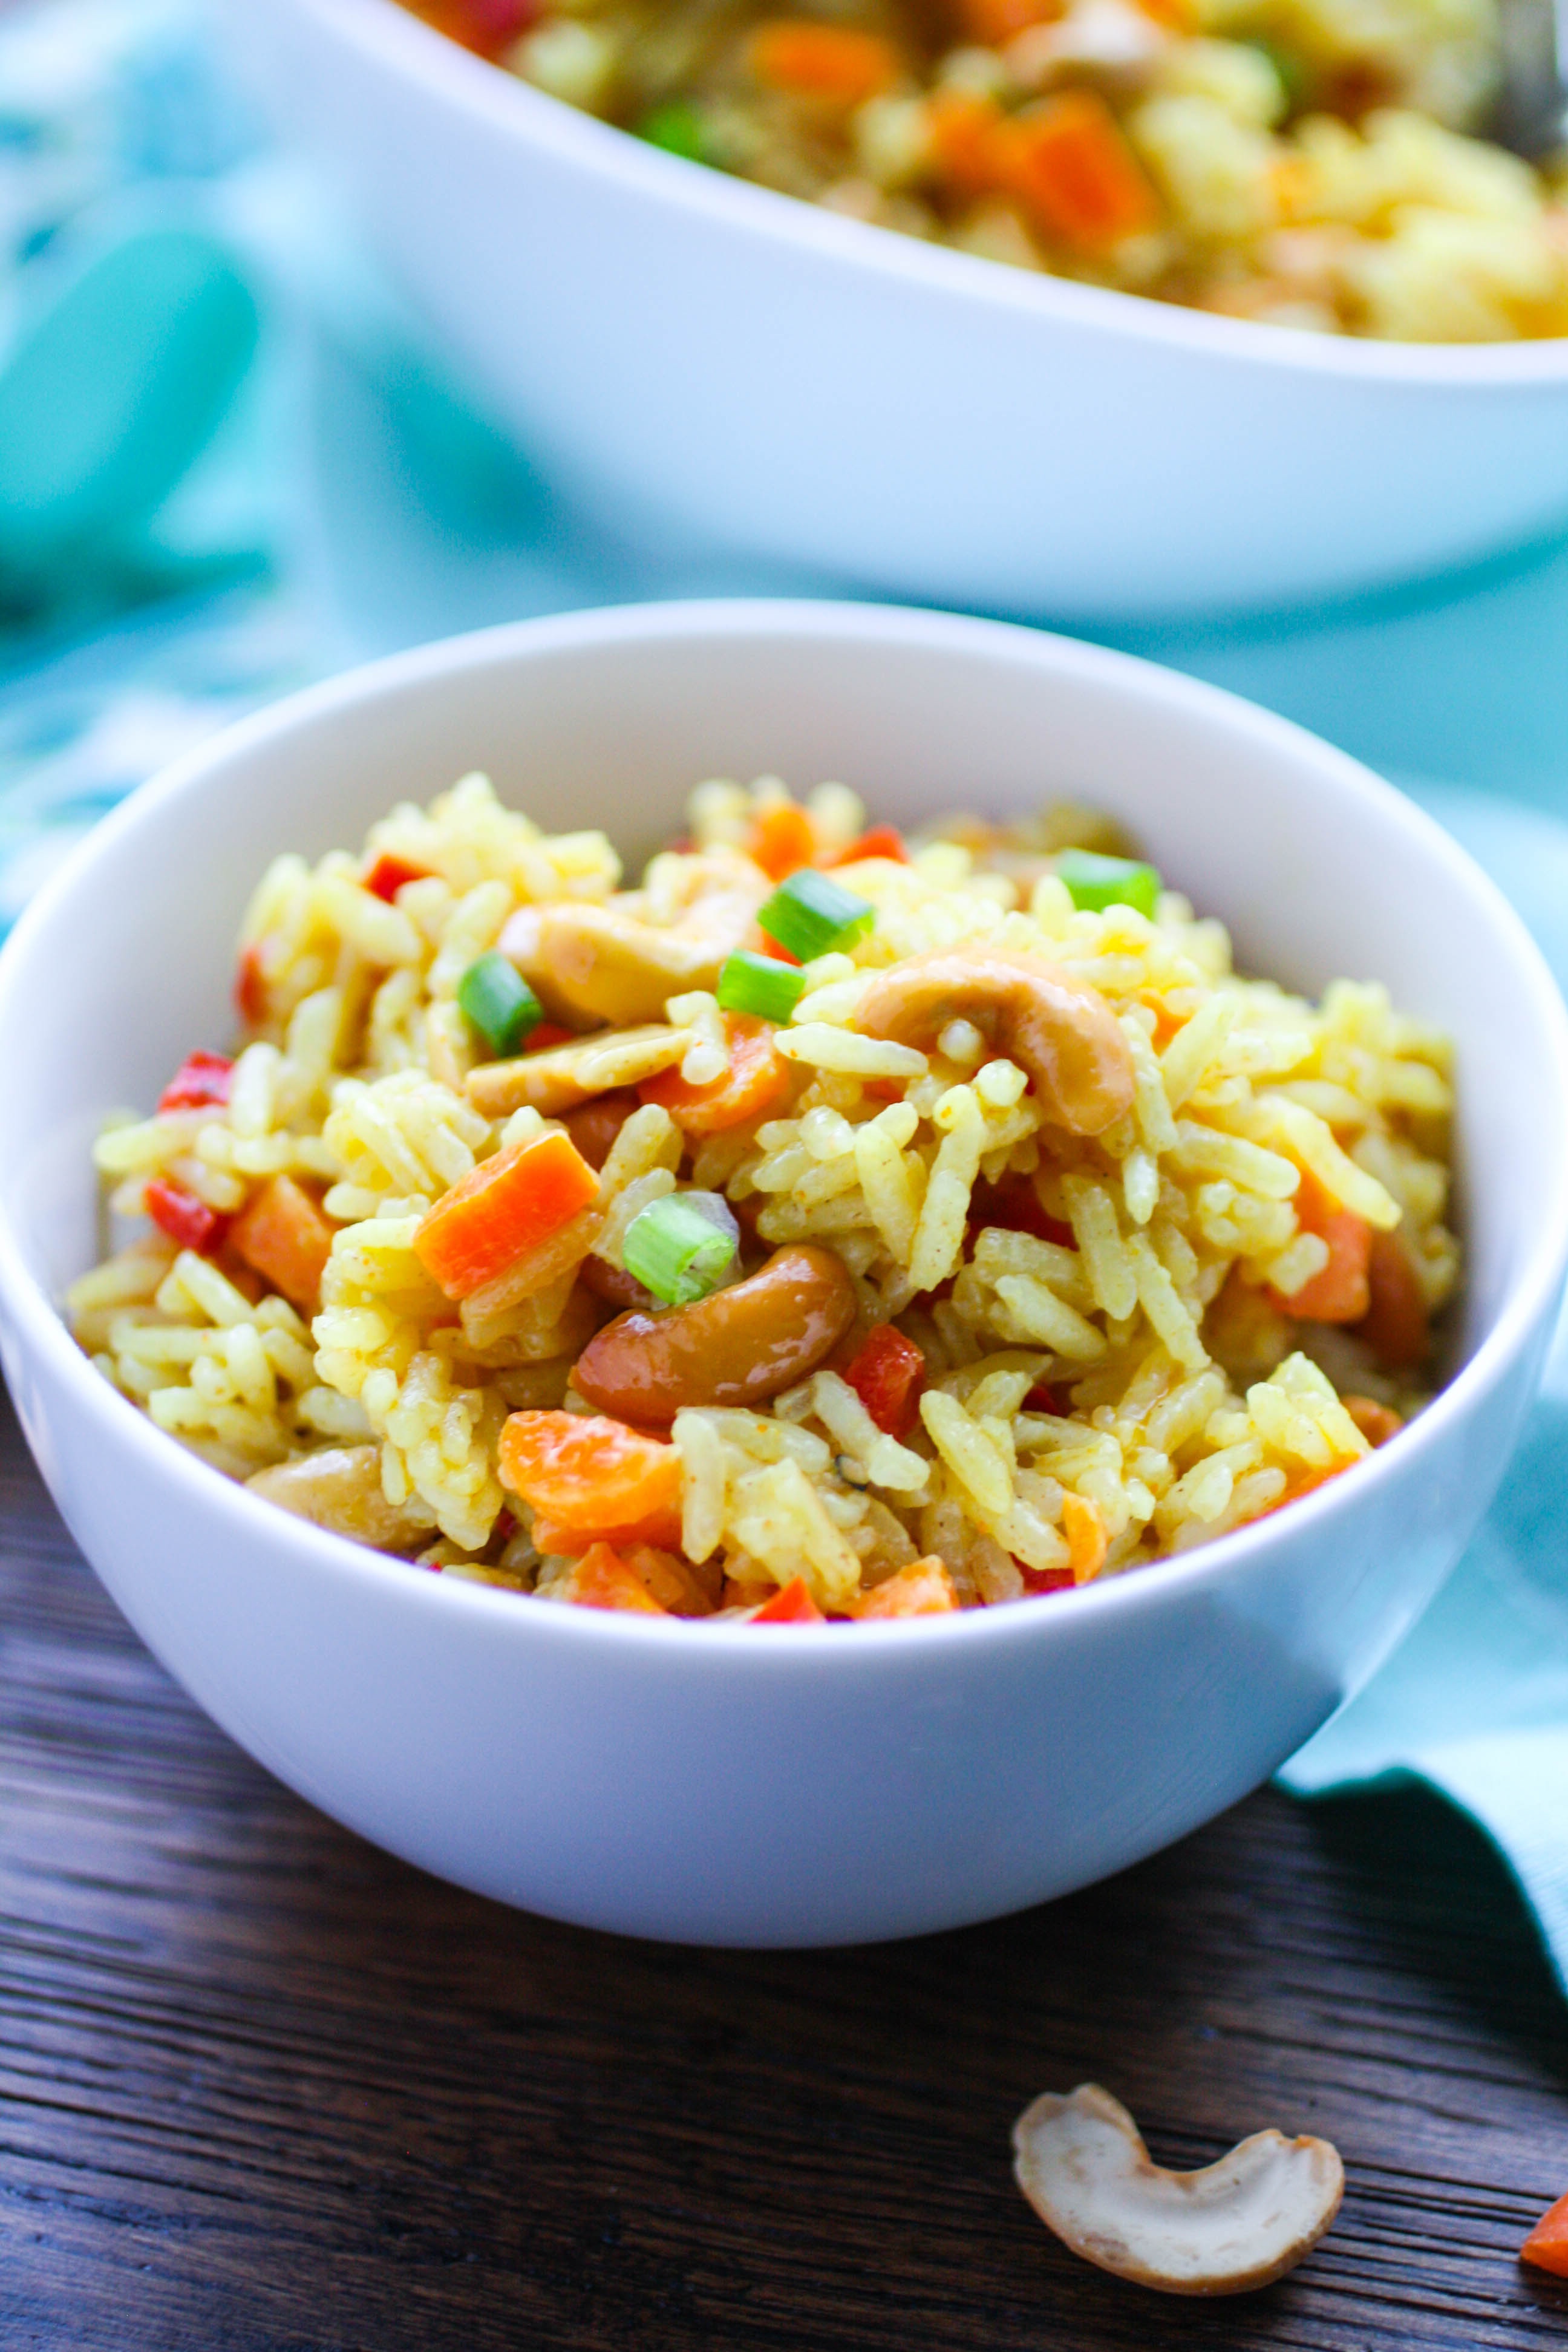 Coconut Carrot and Cashew Rice Pilaf is great as a side dish or as a main dish. Serve it on Meatless Monday, or any day of the week!